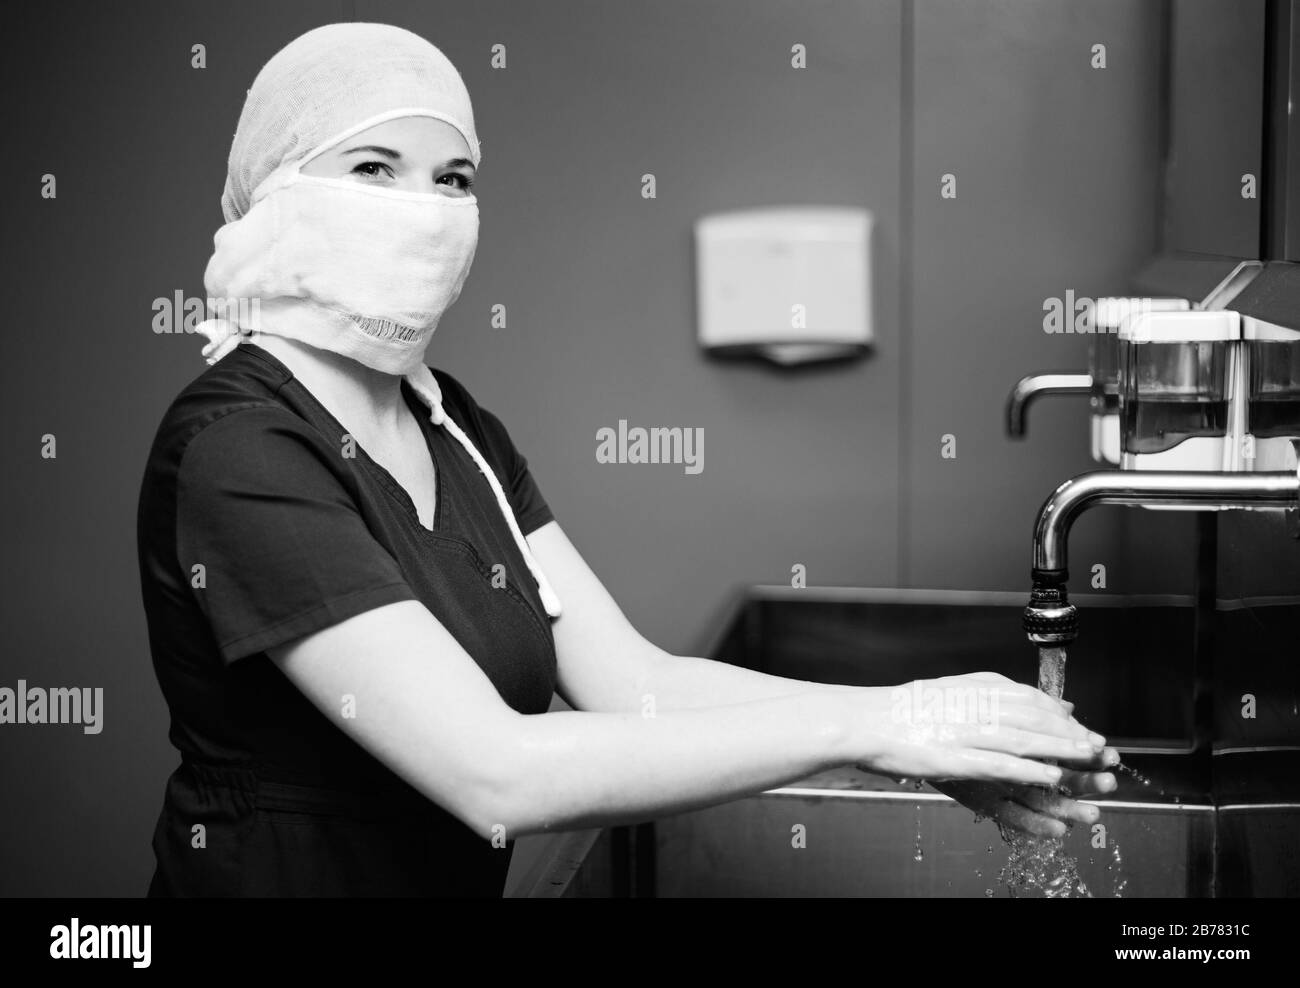 Nurse in protective medical mask washes hands Stock Photo